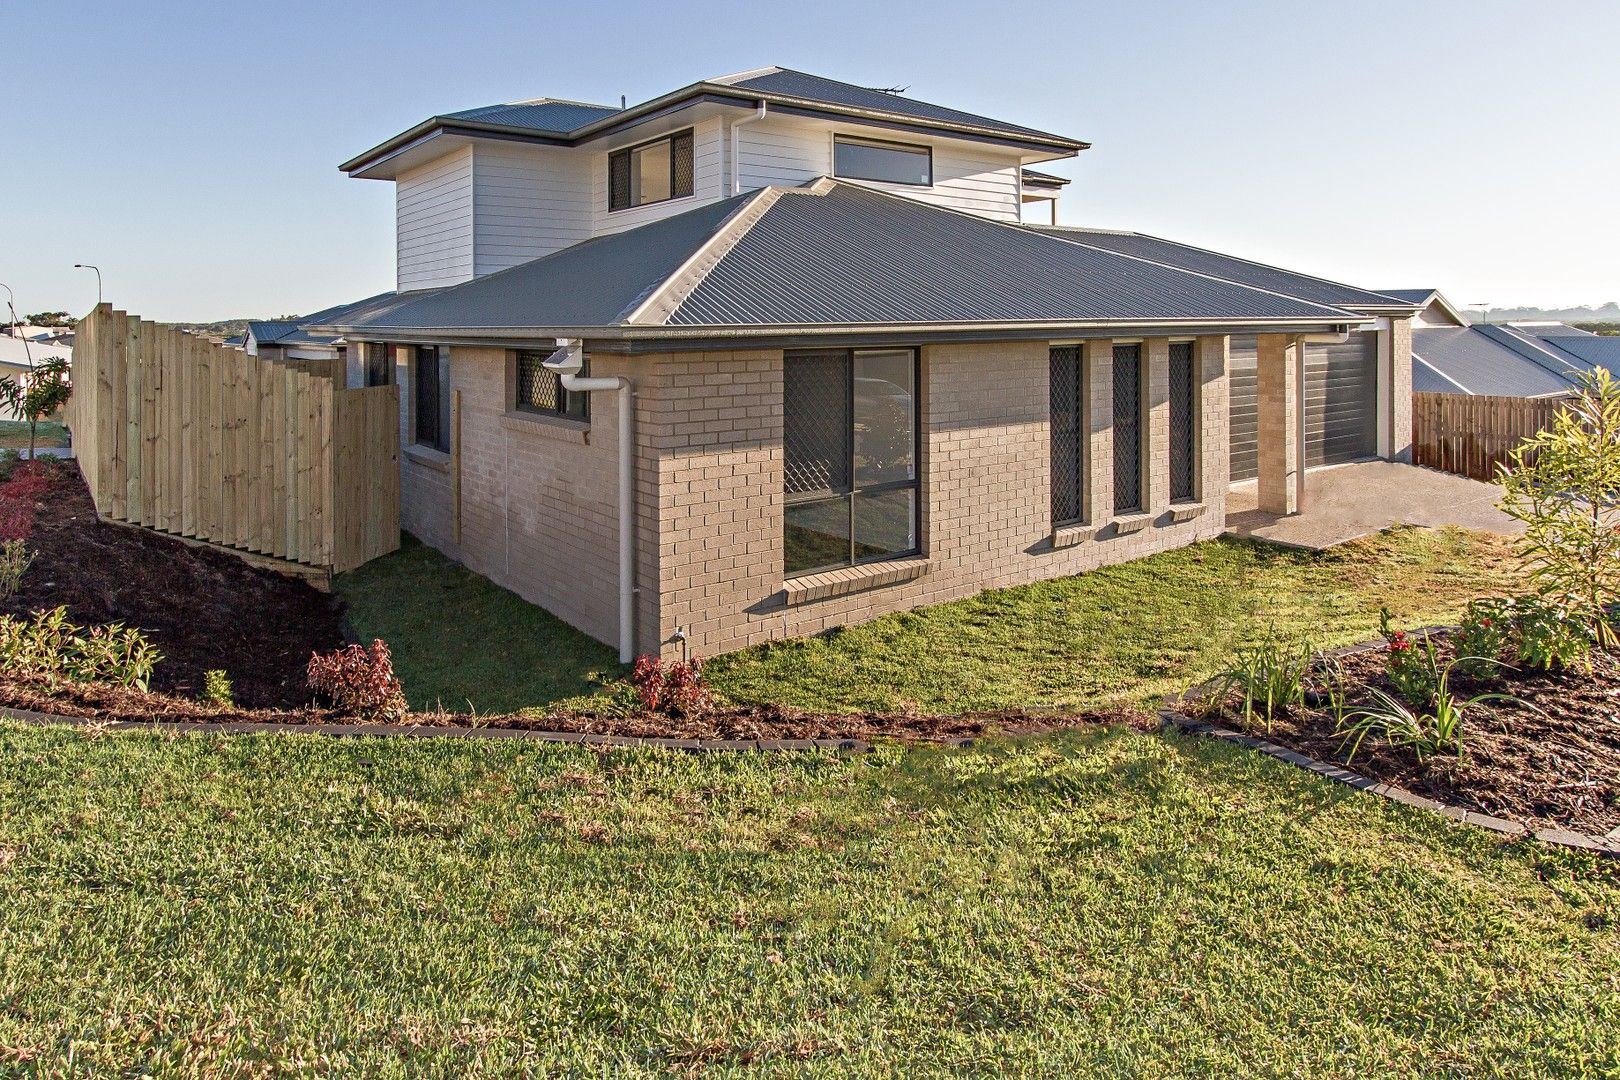 4 Brearley Court, Rural View QLD 4740, Image 0